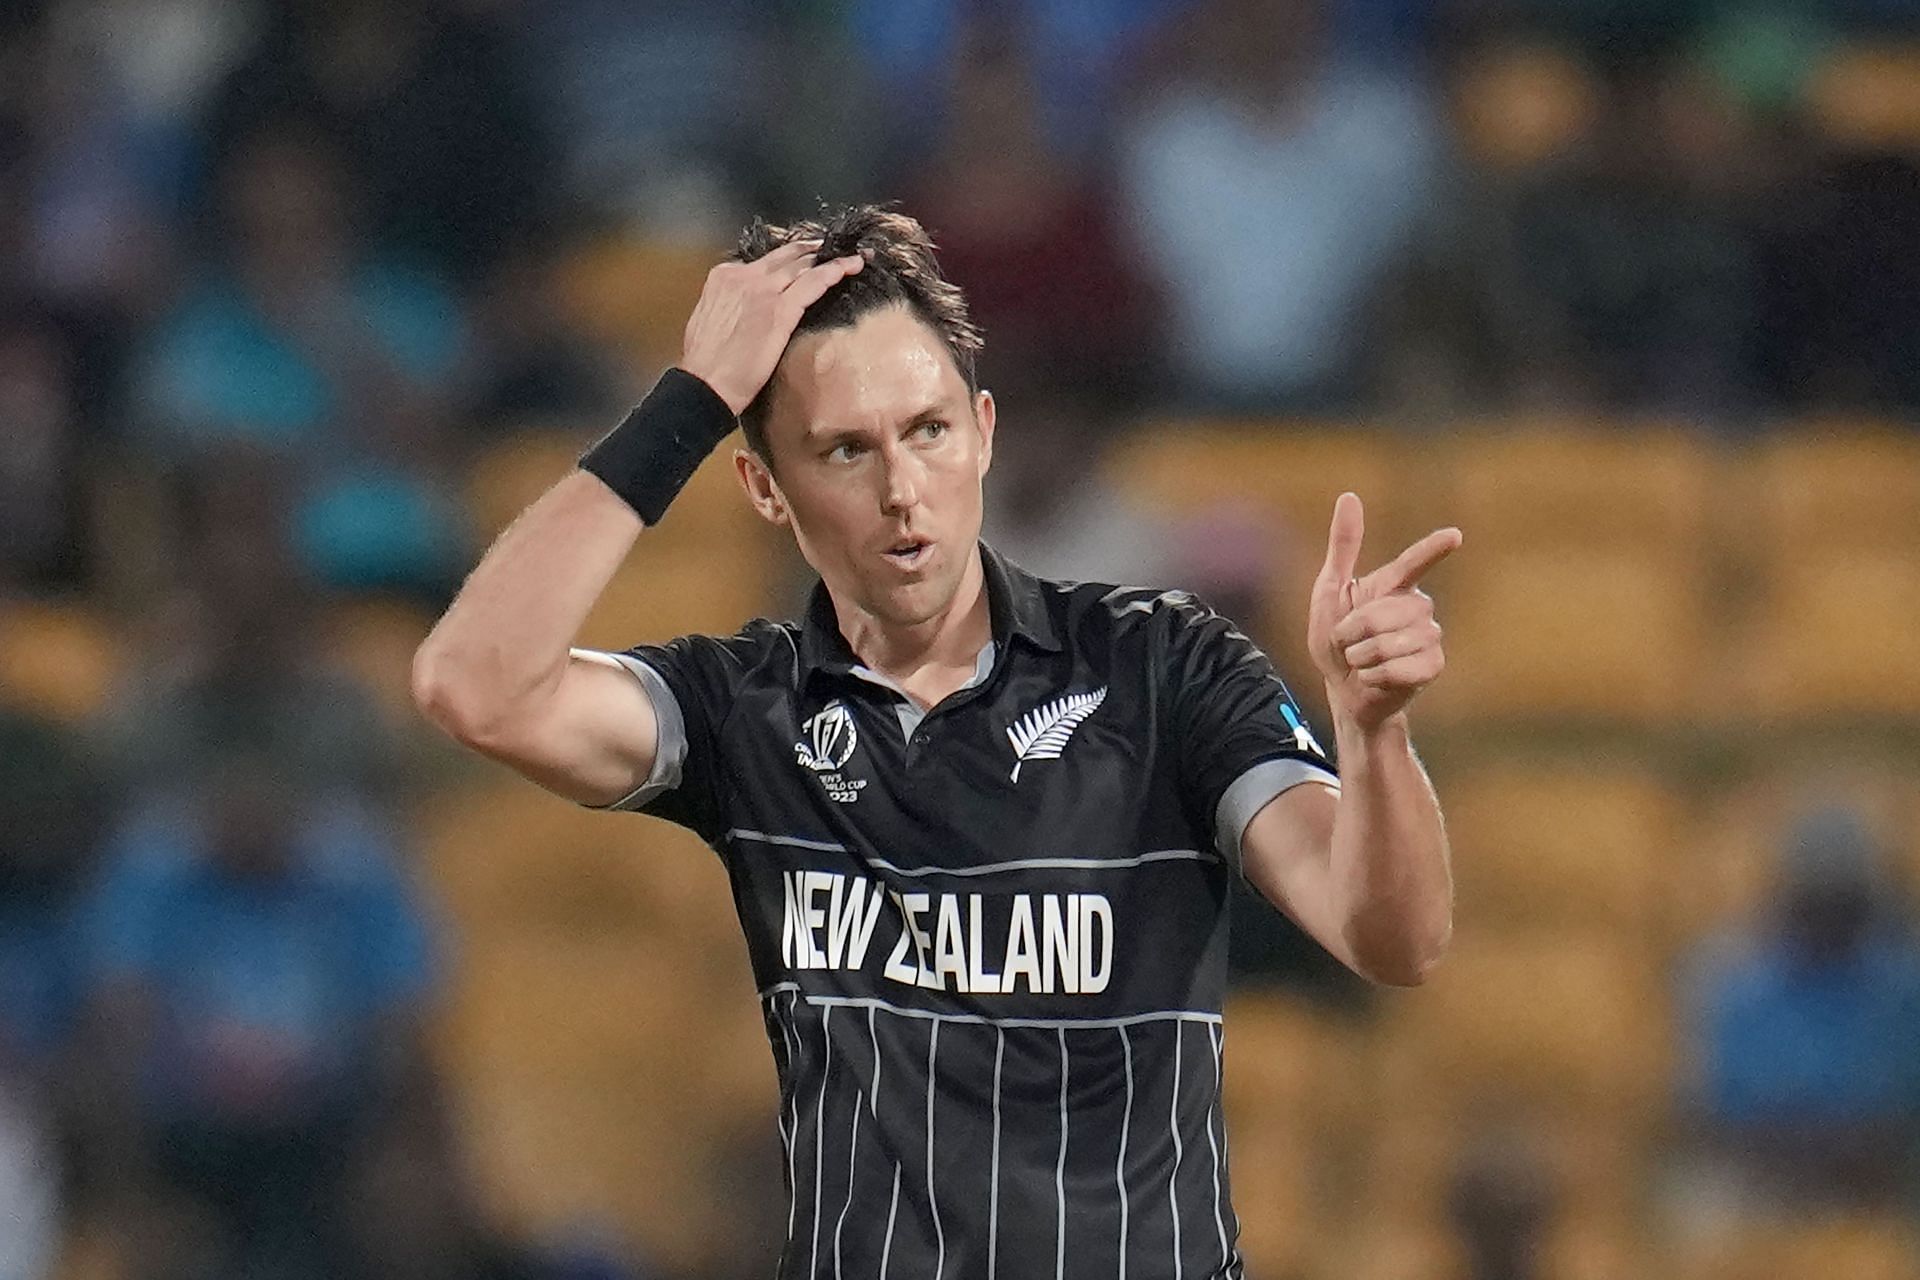 Trent Boult. (Image Credits: Getty)